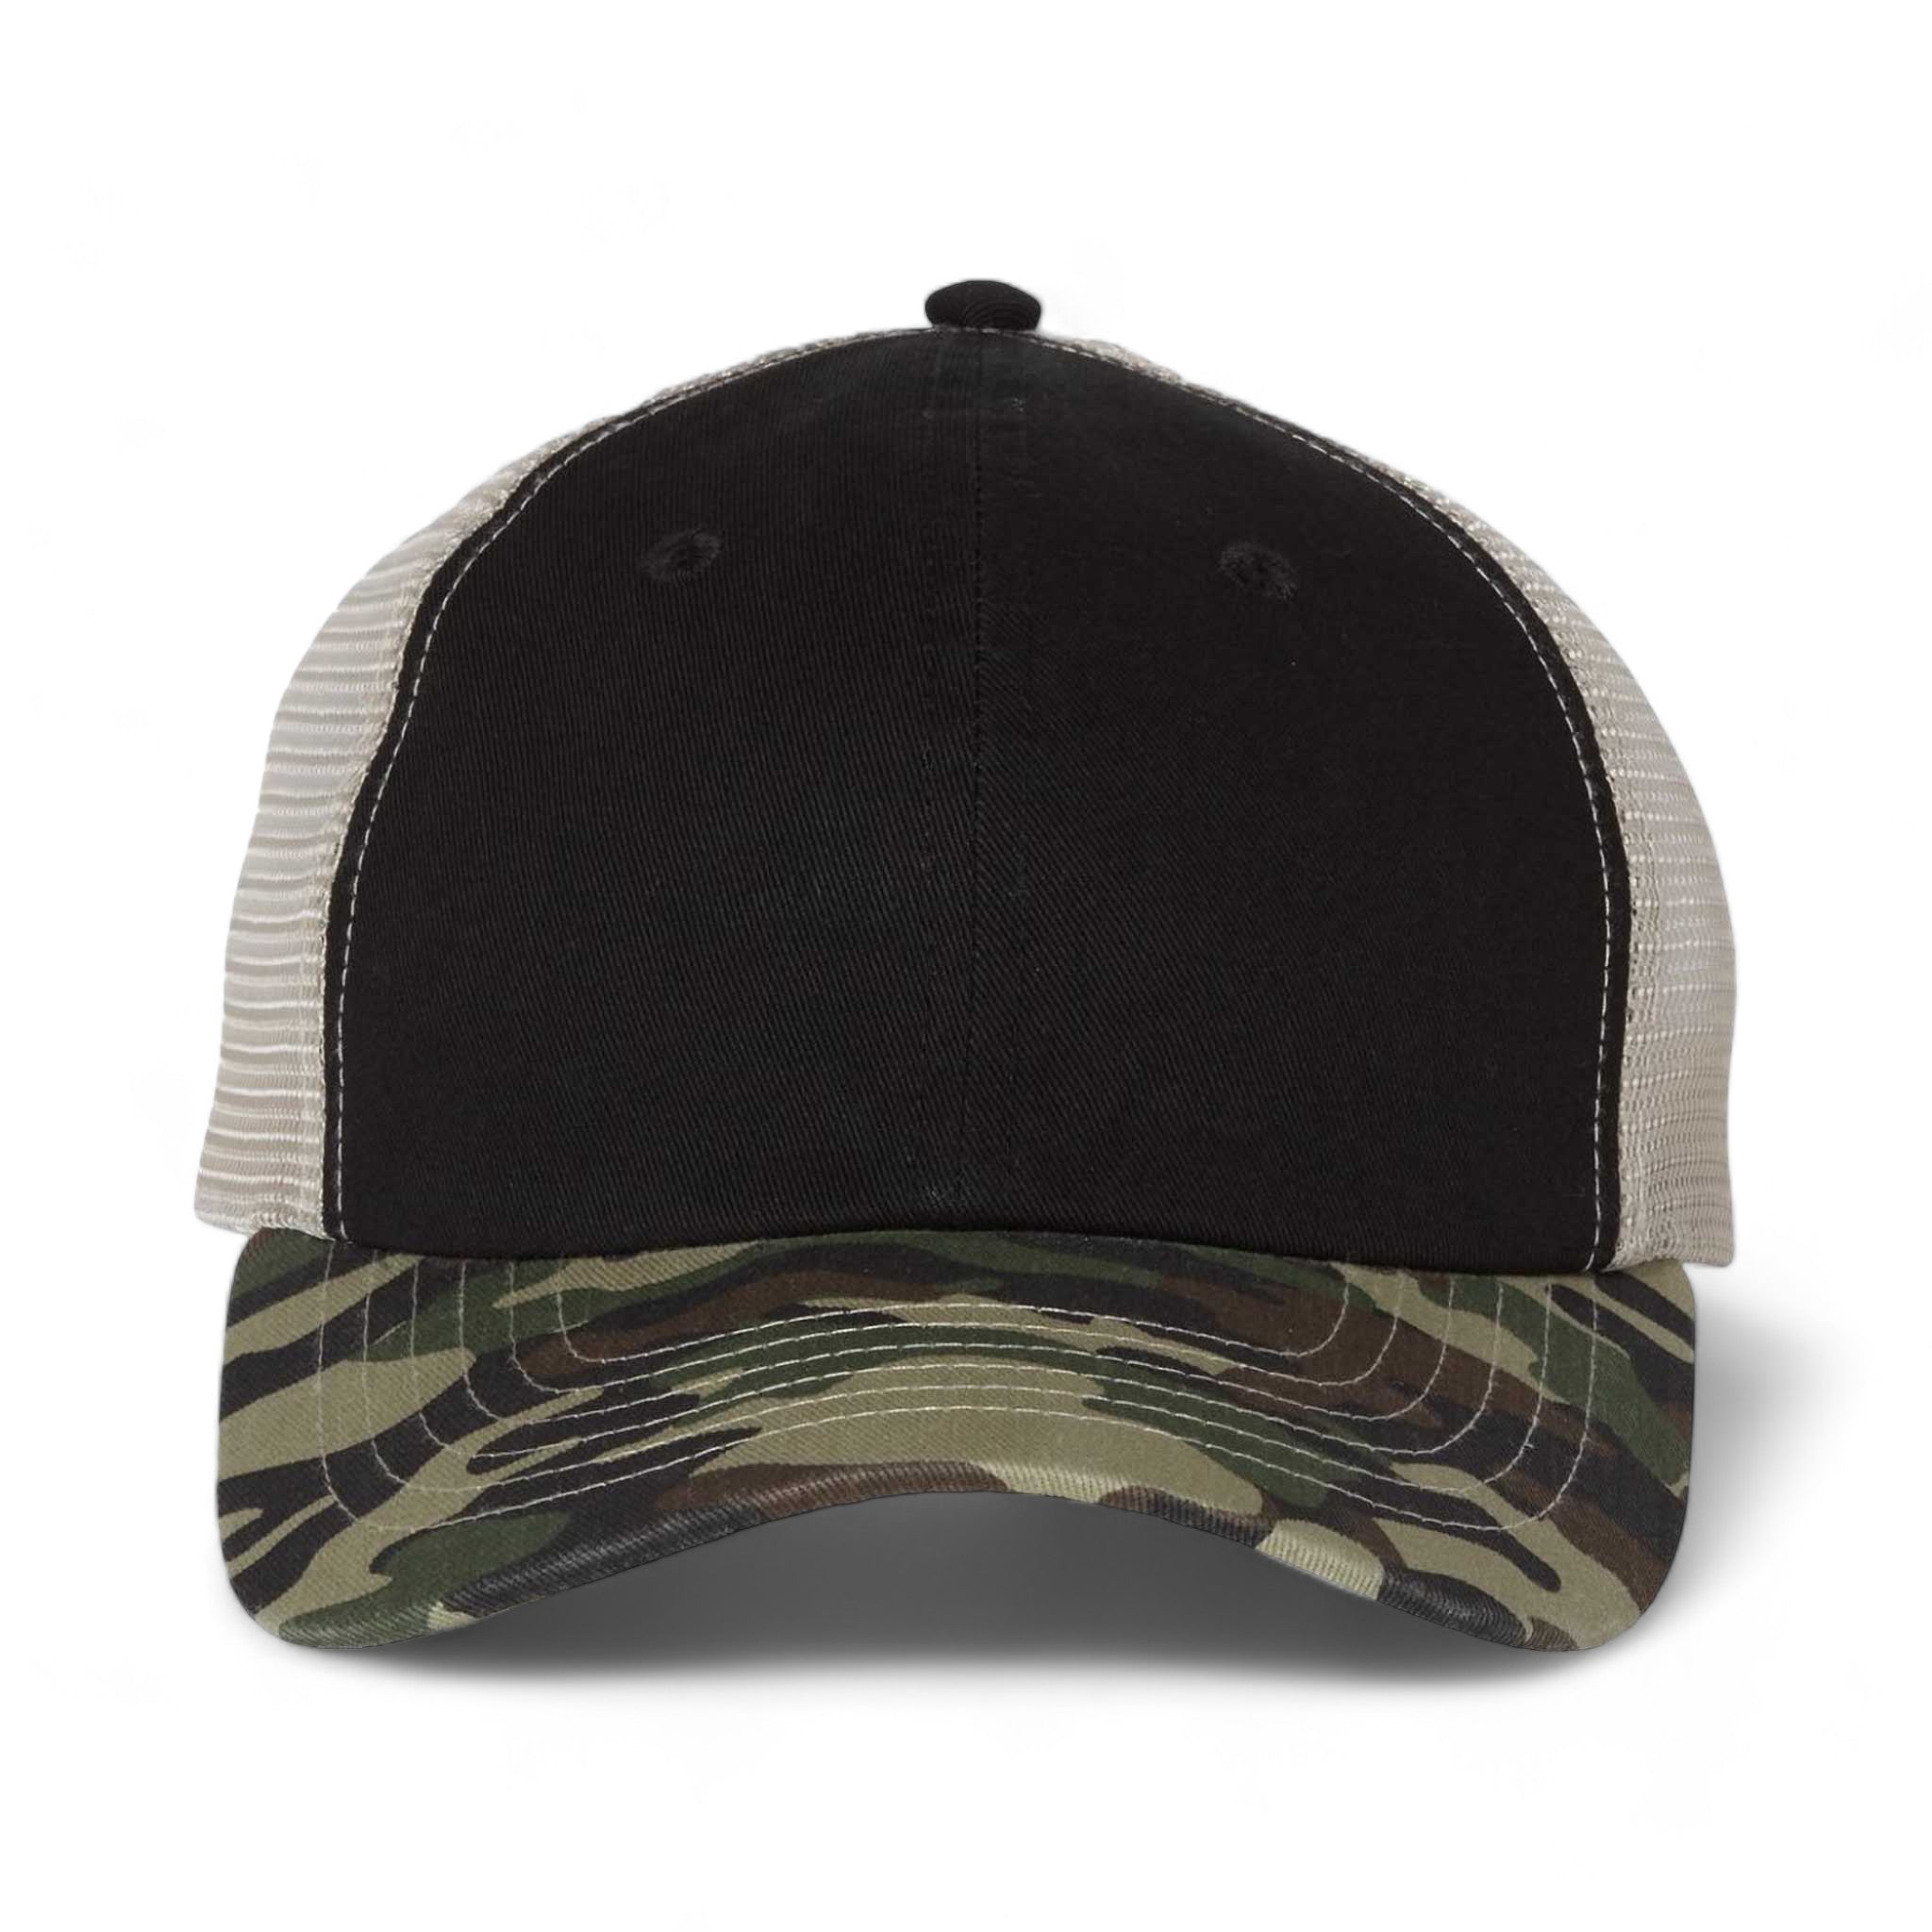 Front view of Sportsman 3100 custom hat in black, camo and stone